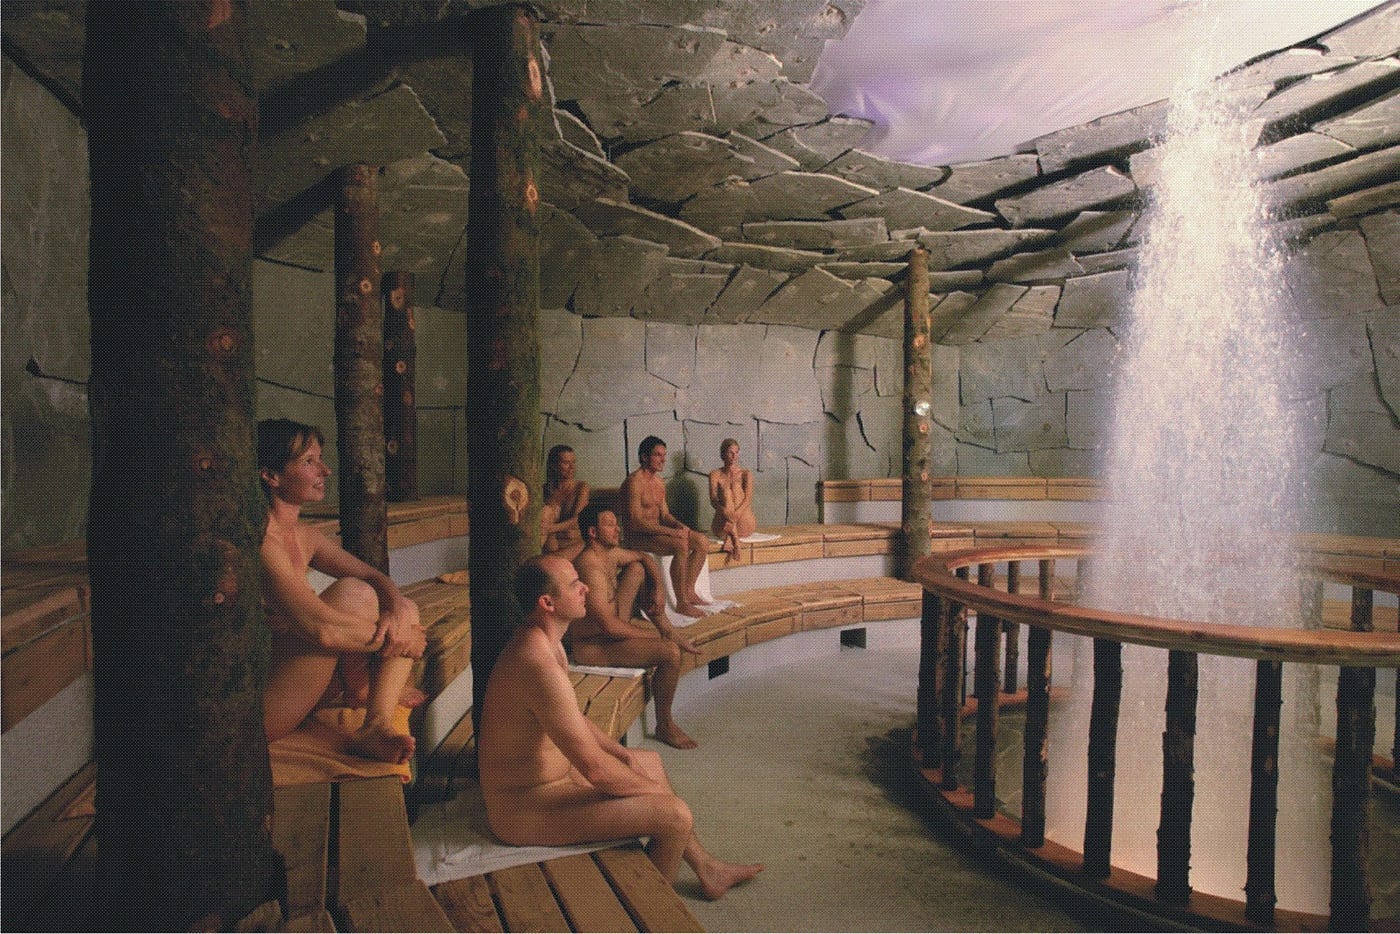 Our Favorite 7 Thermal (Nude) Spas in Deutschland by Dan Carlson Meandering Naturist Globetrotters Medium pic picture